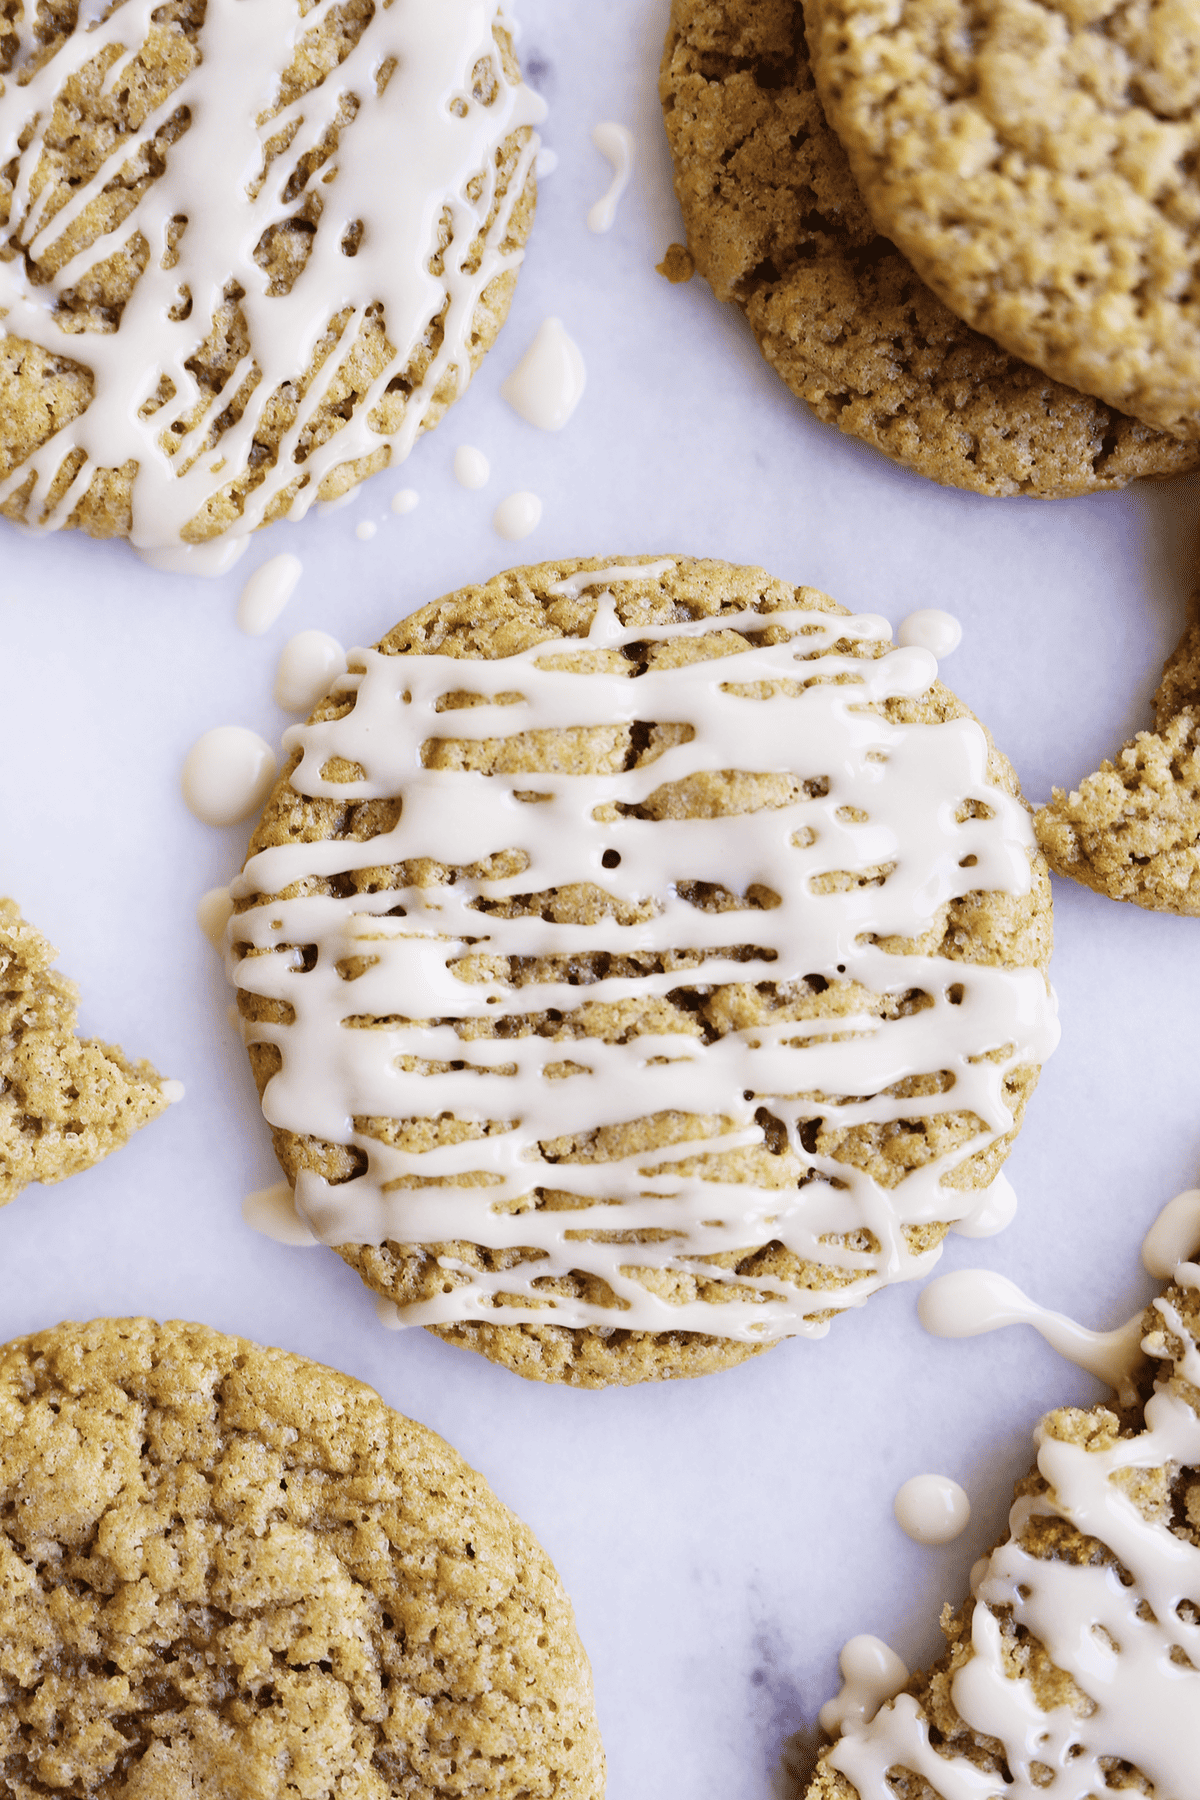 These Chewy Apple Cider Cookies are the best fall cookies ever! They are chewy in the middle and have crisps edges, they are vegan and absolutely delicious!